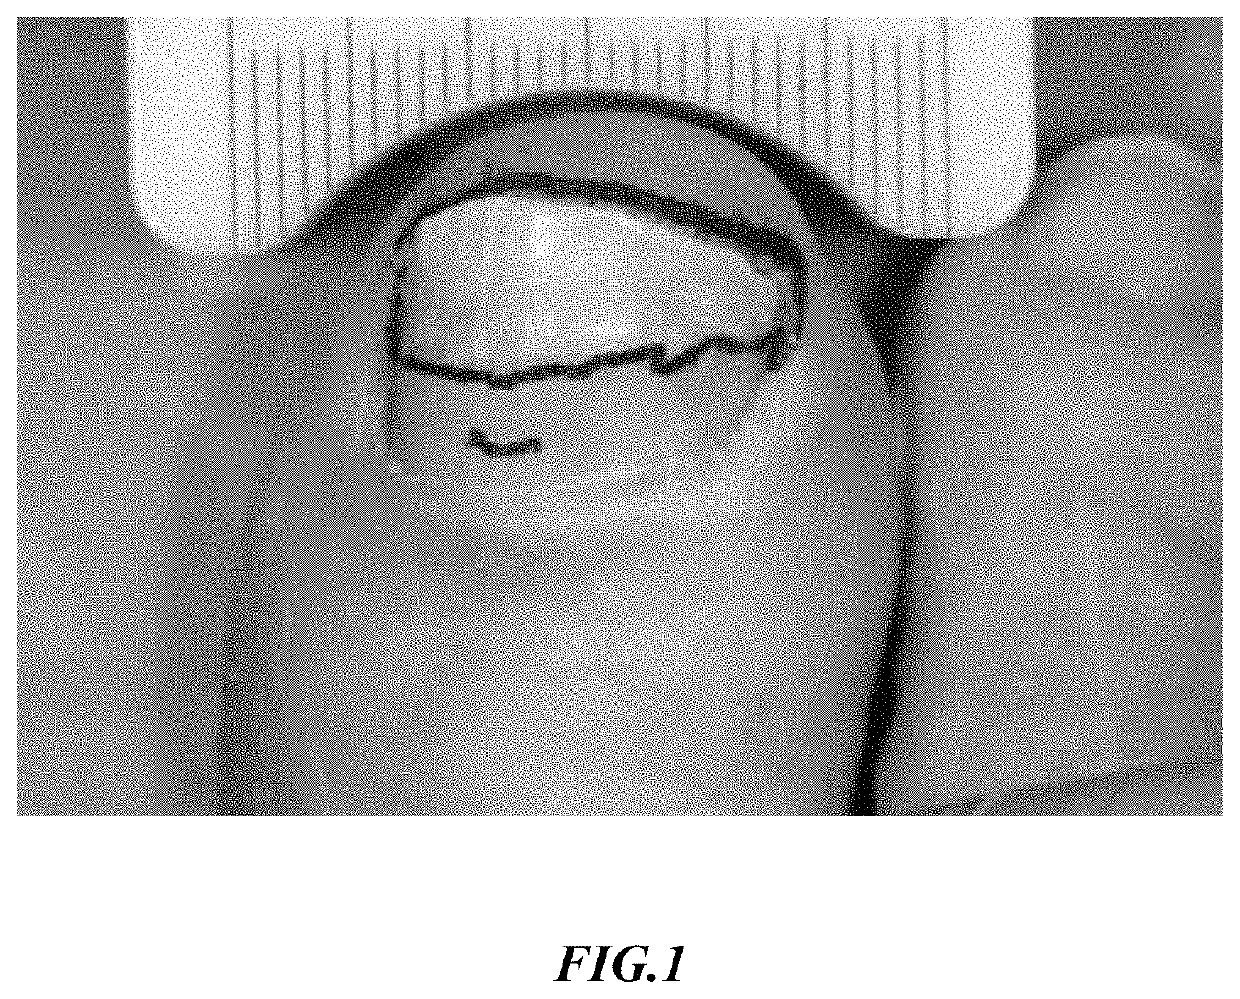 Onychomycosis treatment compositions and methods